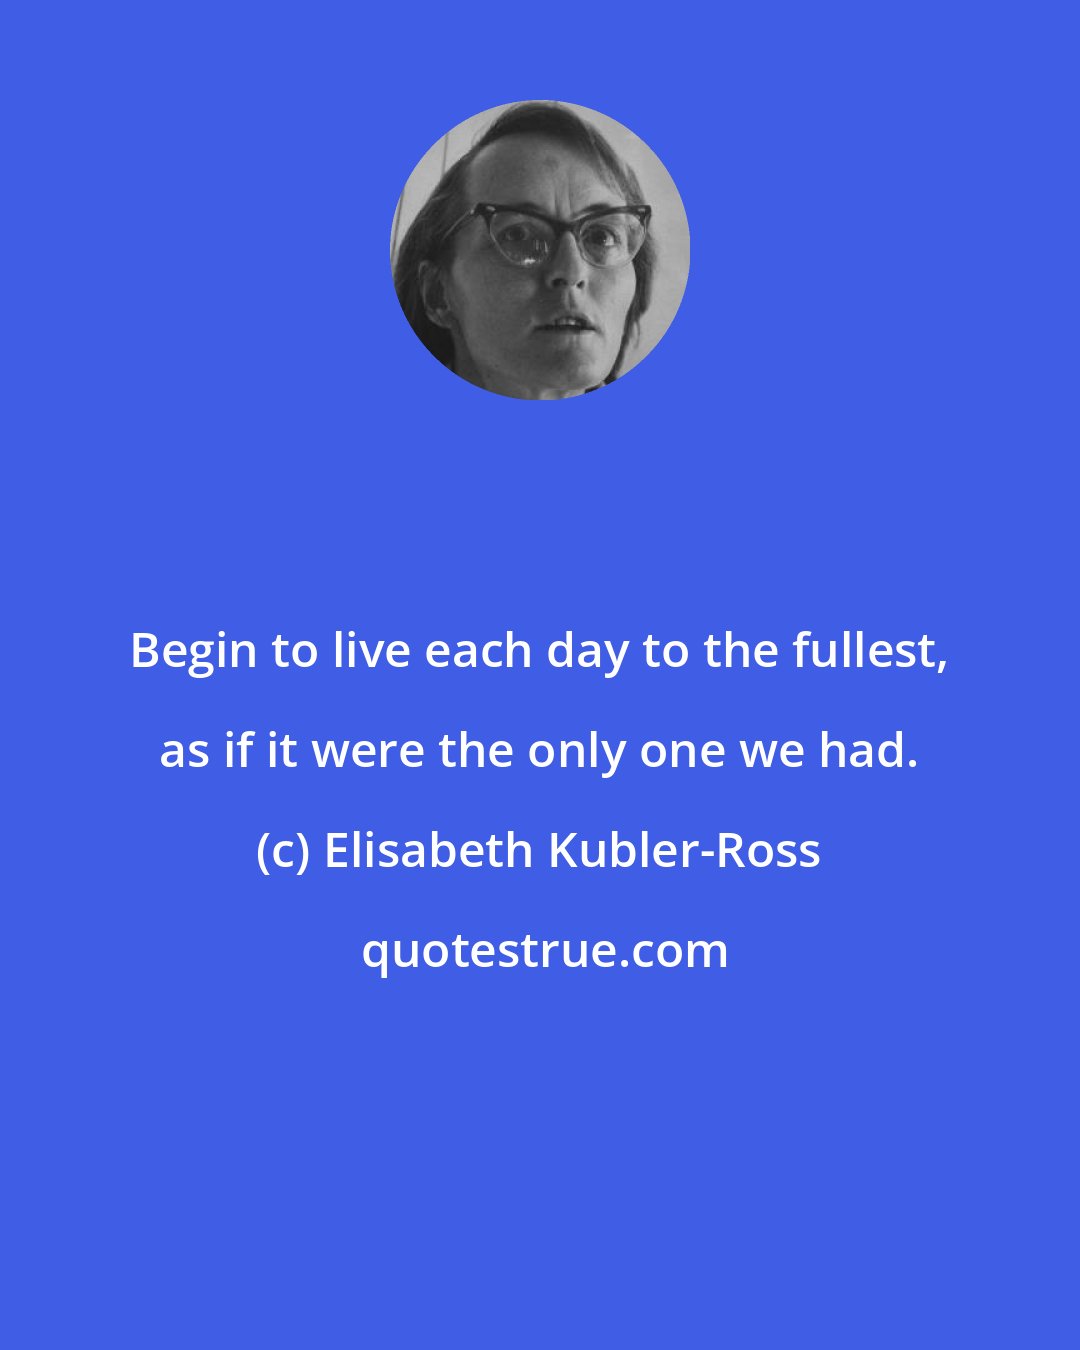 Elisabeth Kubler-Ross: Begin to live each day to the fullest, as if it were the only one we had.